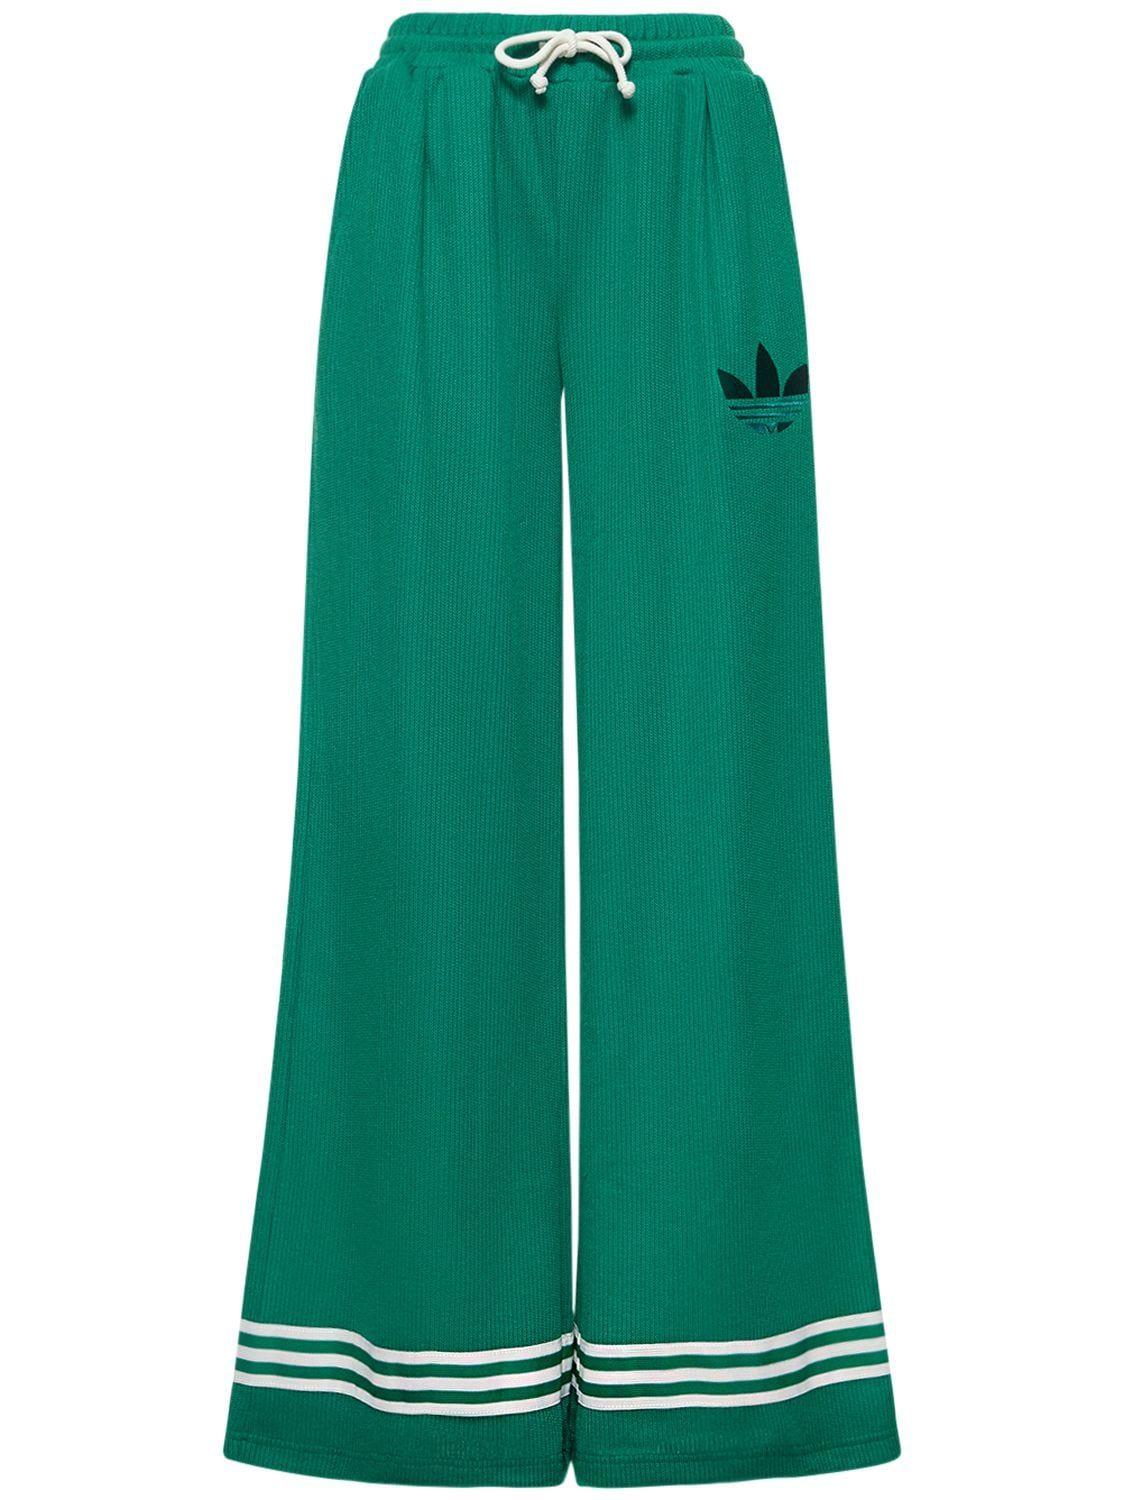 adidas Originals Knit Wide Pants in Green